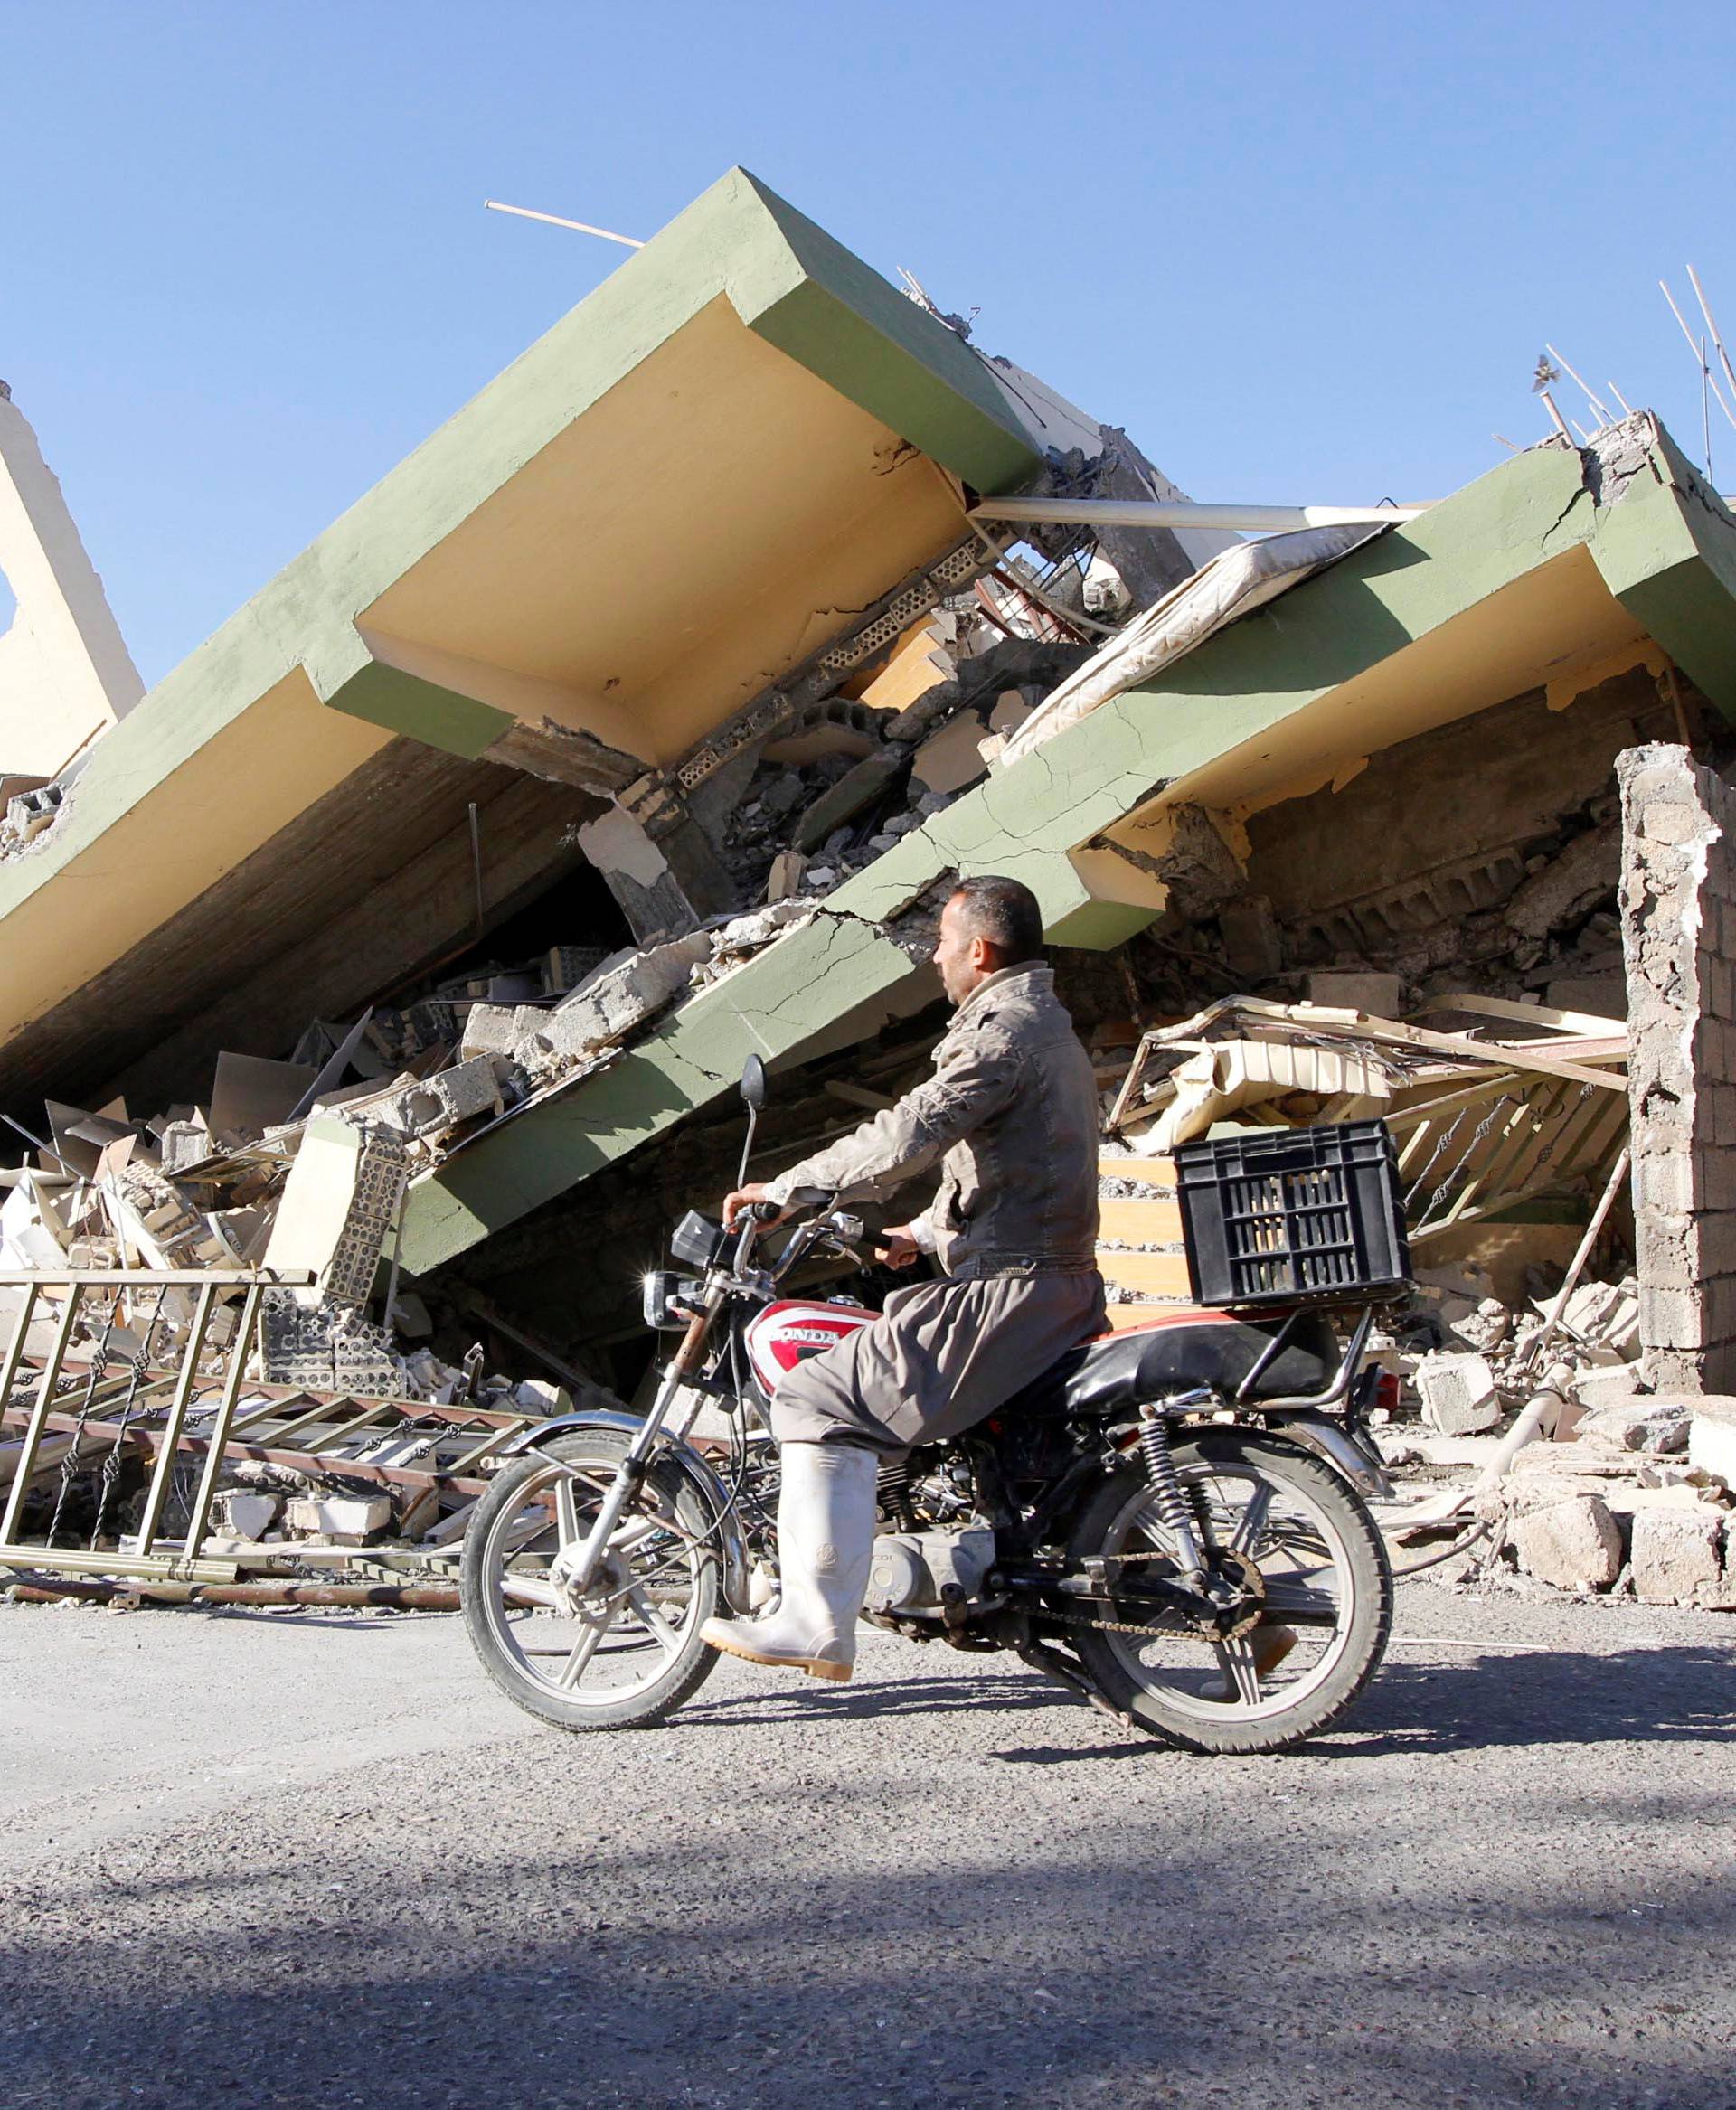 A man rides a motorcycle past a damaged building following an earthquake in the town of Darbandikhan